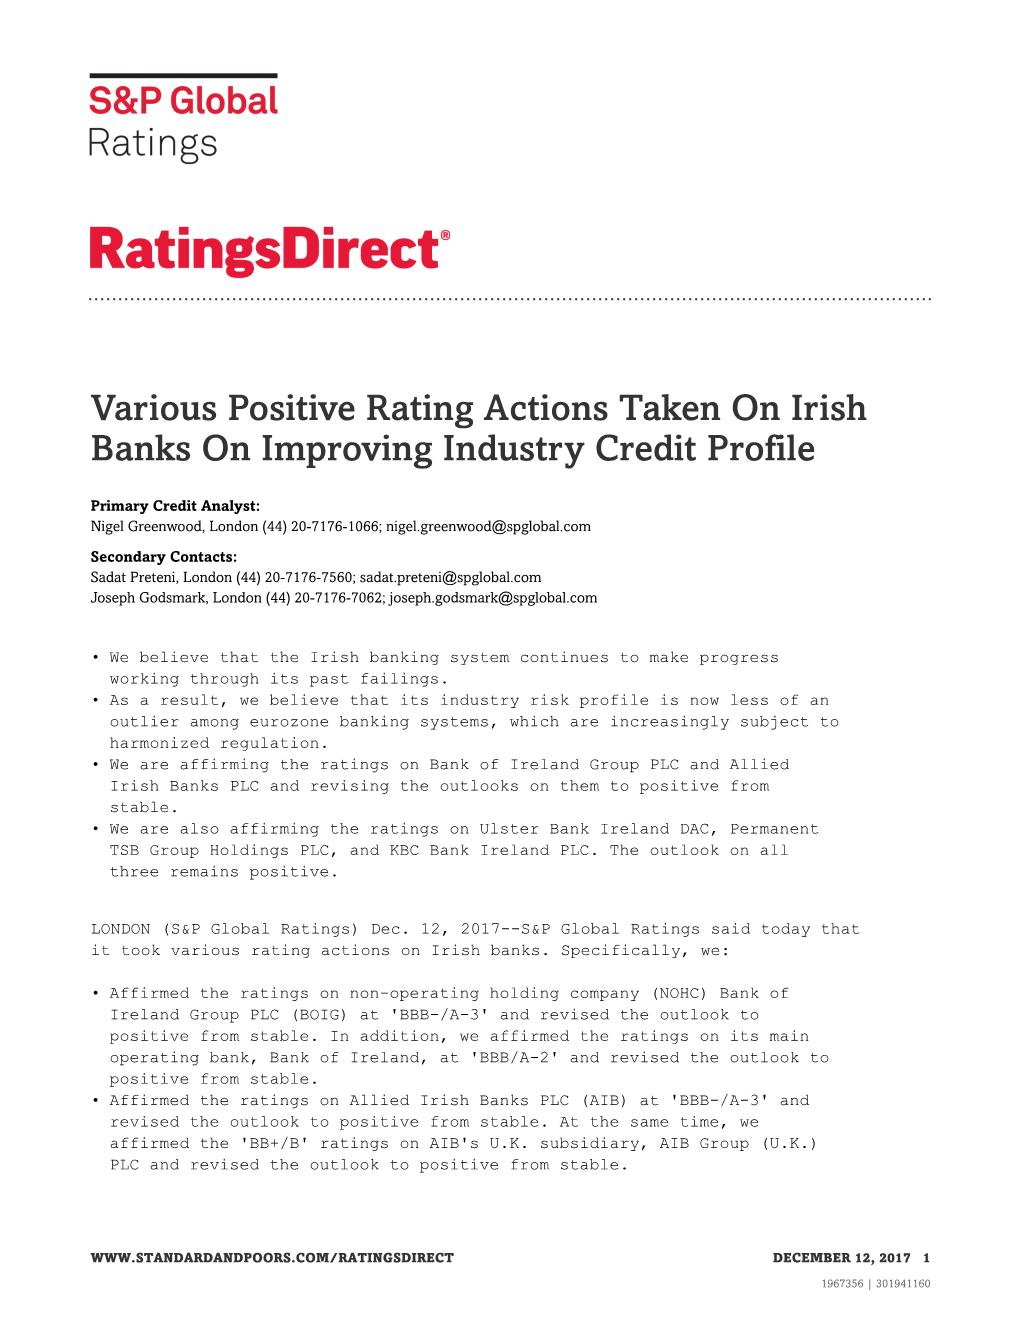 Various Positive Rating Actions Taken on Irish Banks on Improving Industry Credit Profile